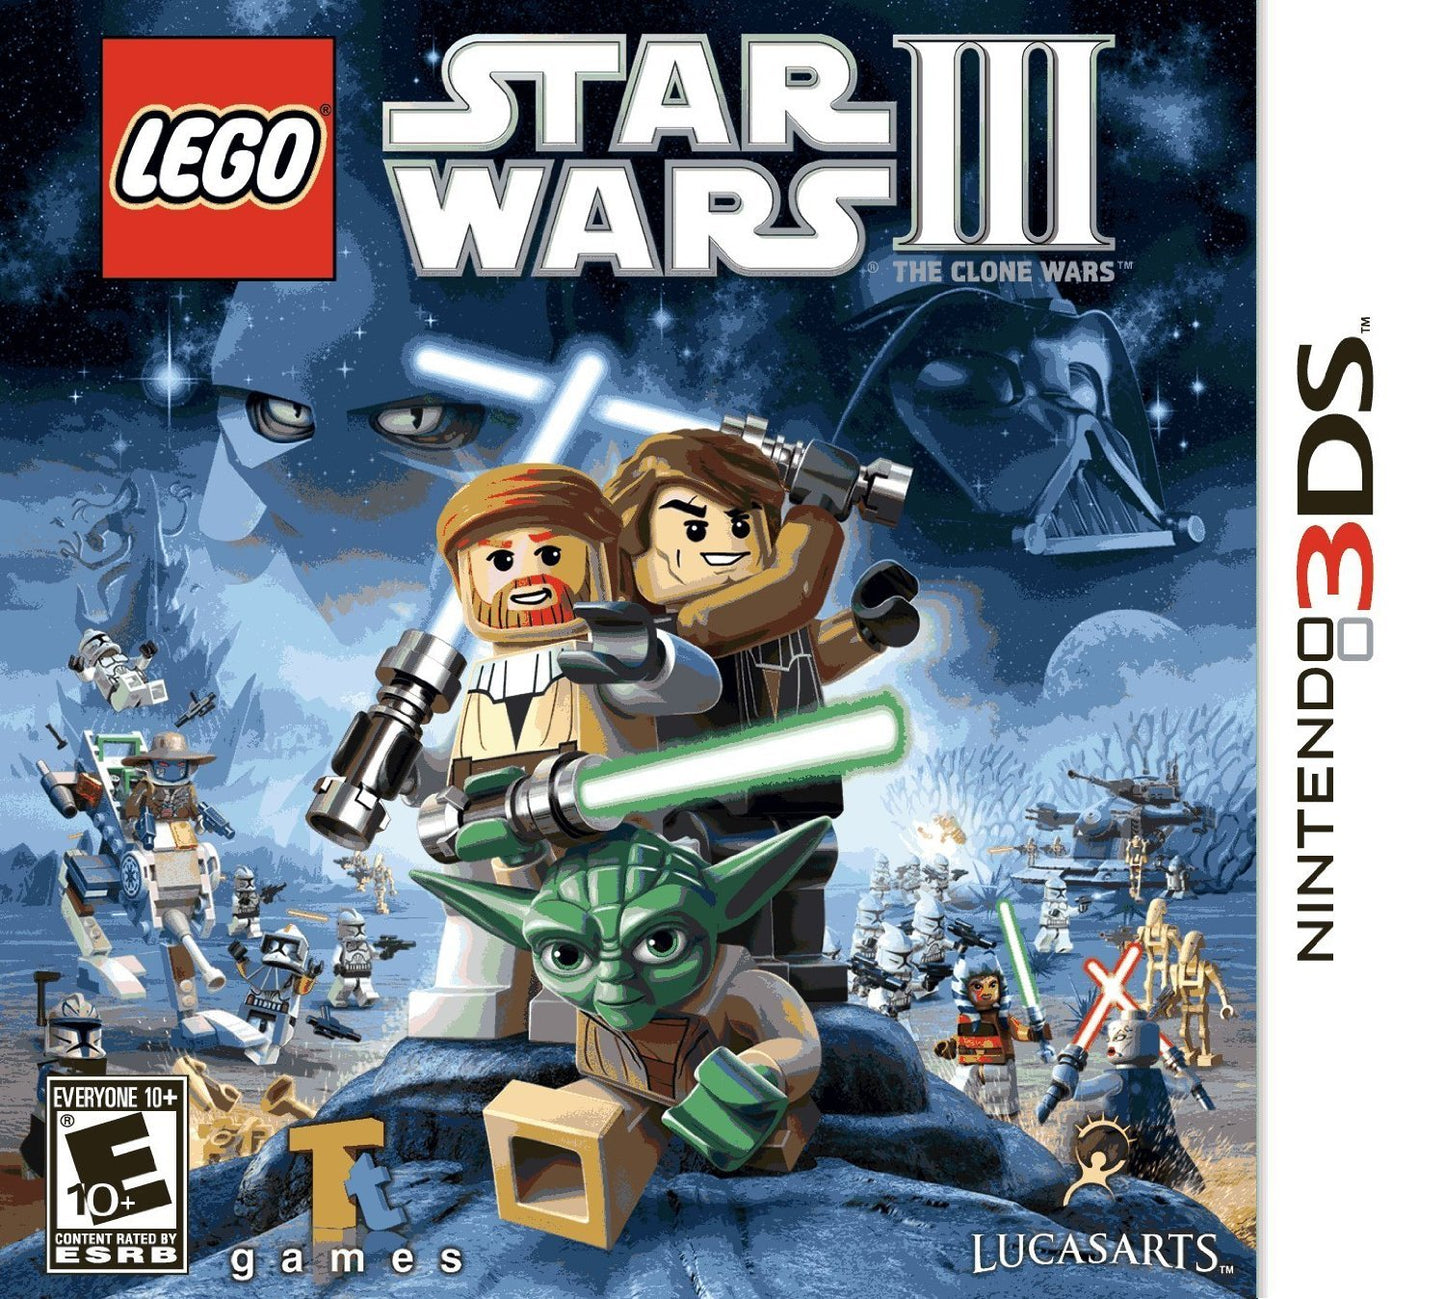 Lego Star Wars III The Clone Wars Bundle [Game + Strategy Guide] (Nintendo 3DS)